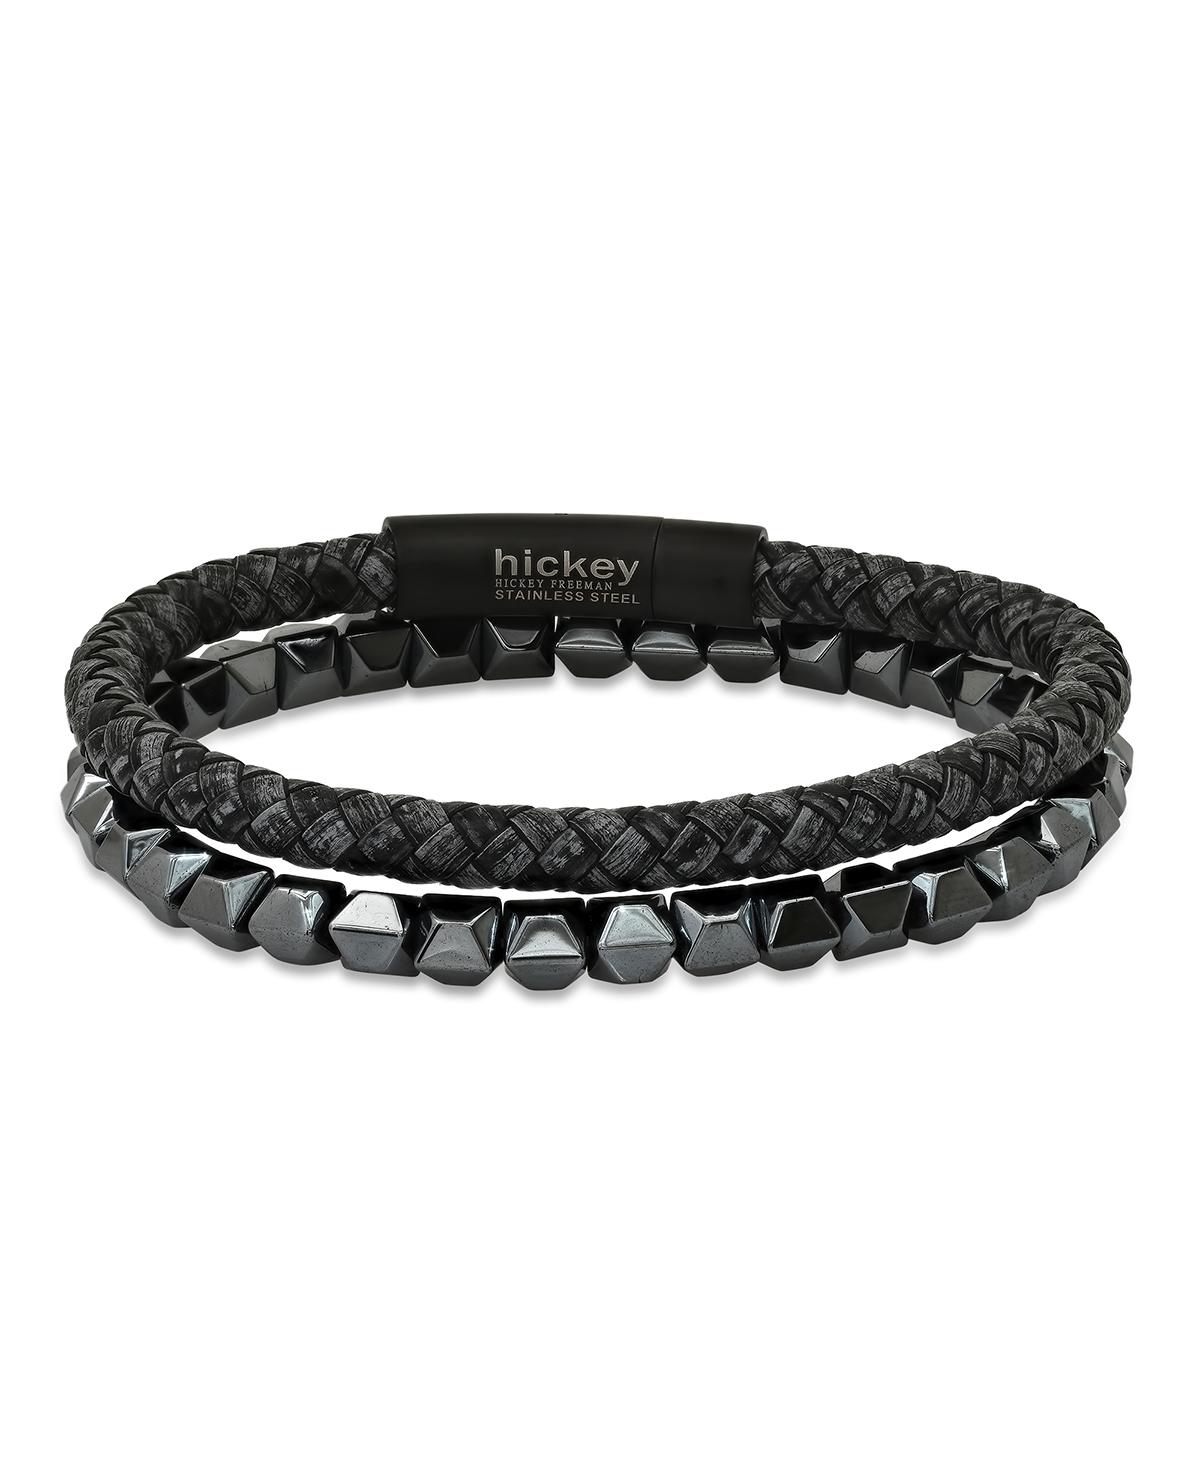 Hmy Jewelry Hickey By Hickey Freeman Studded Faceted Hematite Beaded Stretch Bracelet, 2 Piece Set In Charcoal